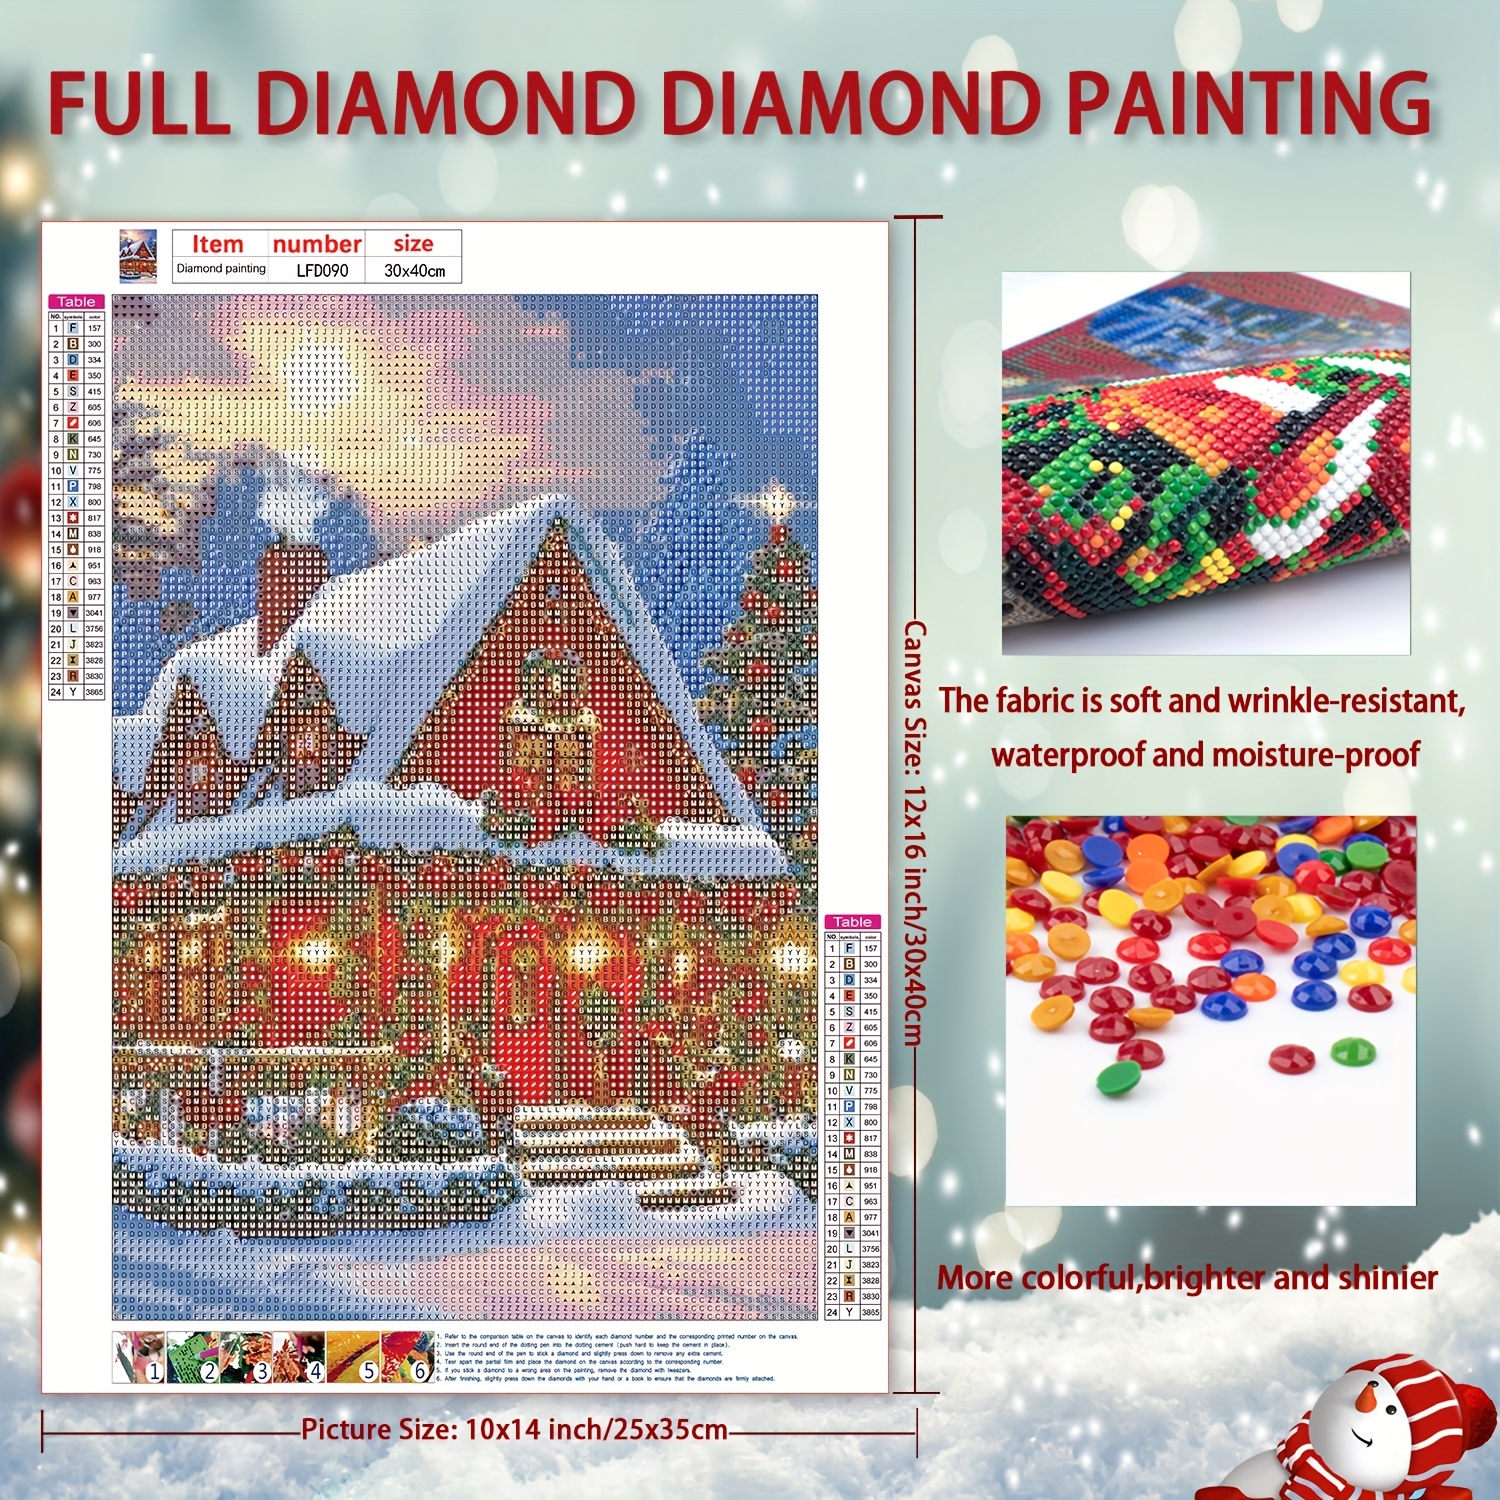  Tontut Christmas Diamond Painting Kits, Adult Christmas  Stocking Diamond Art Set, 5d Diamond Handmade Artwork, Home Wall Decoration  Gift 12 x 16 inches